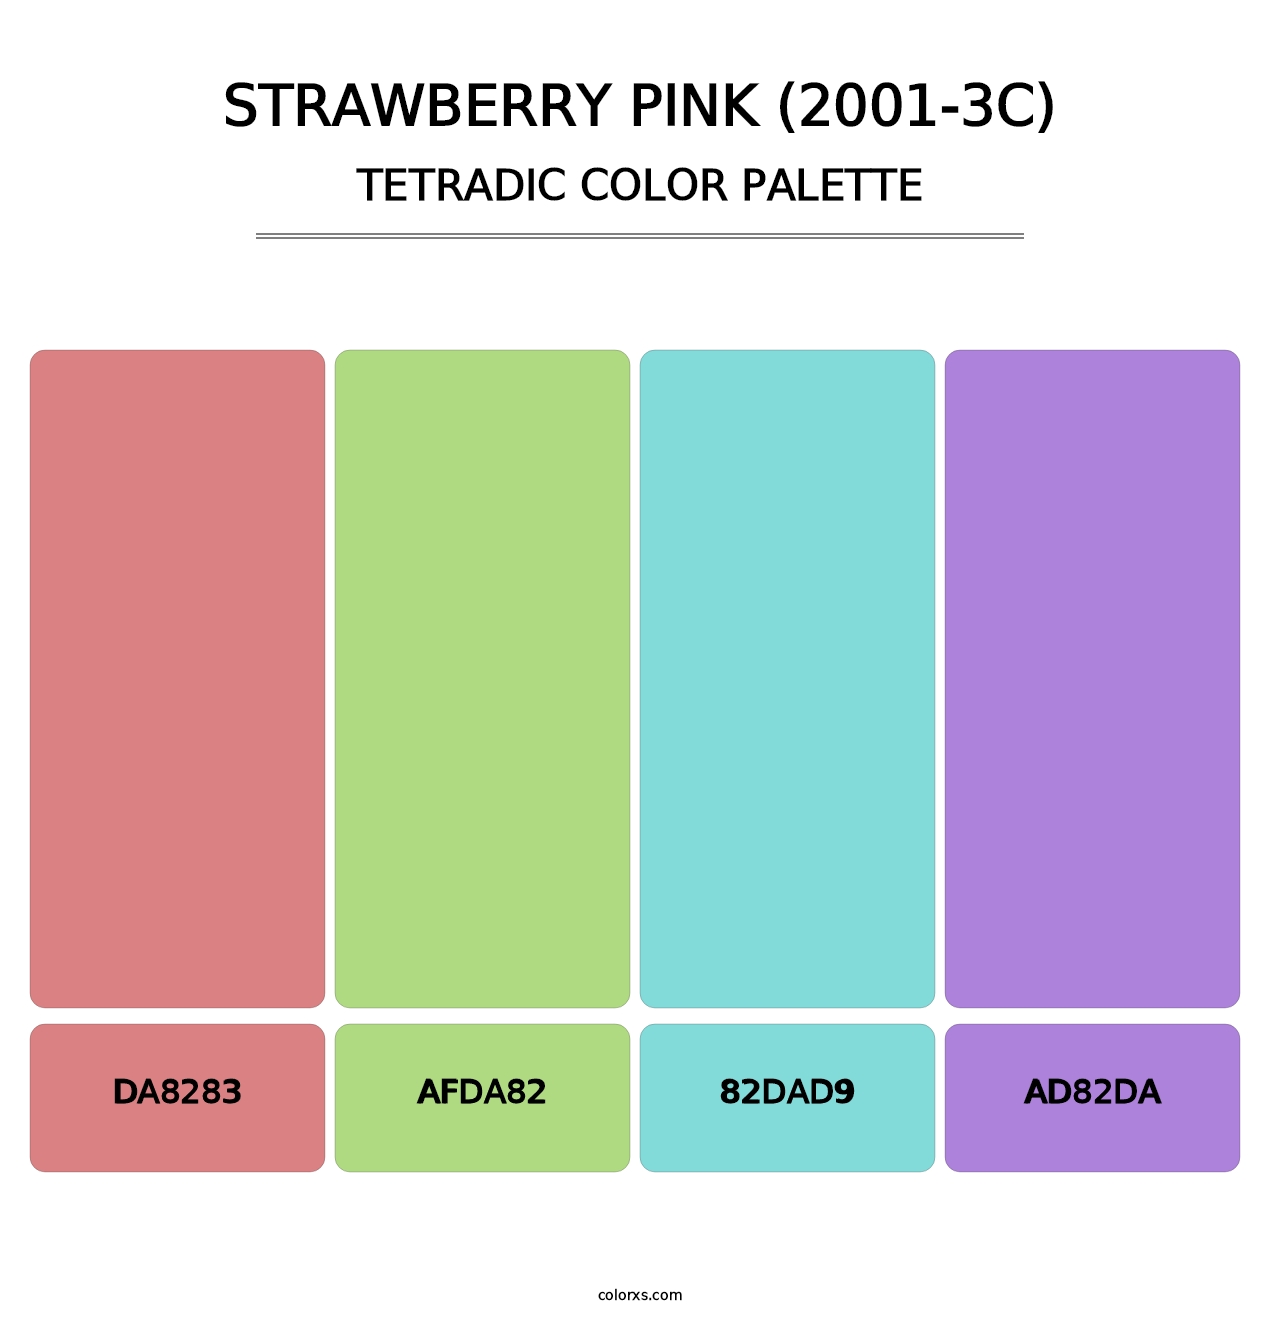 Strawberry Pink (2001-3C) - Tetradic Color Palette